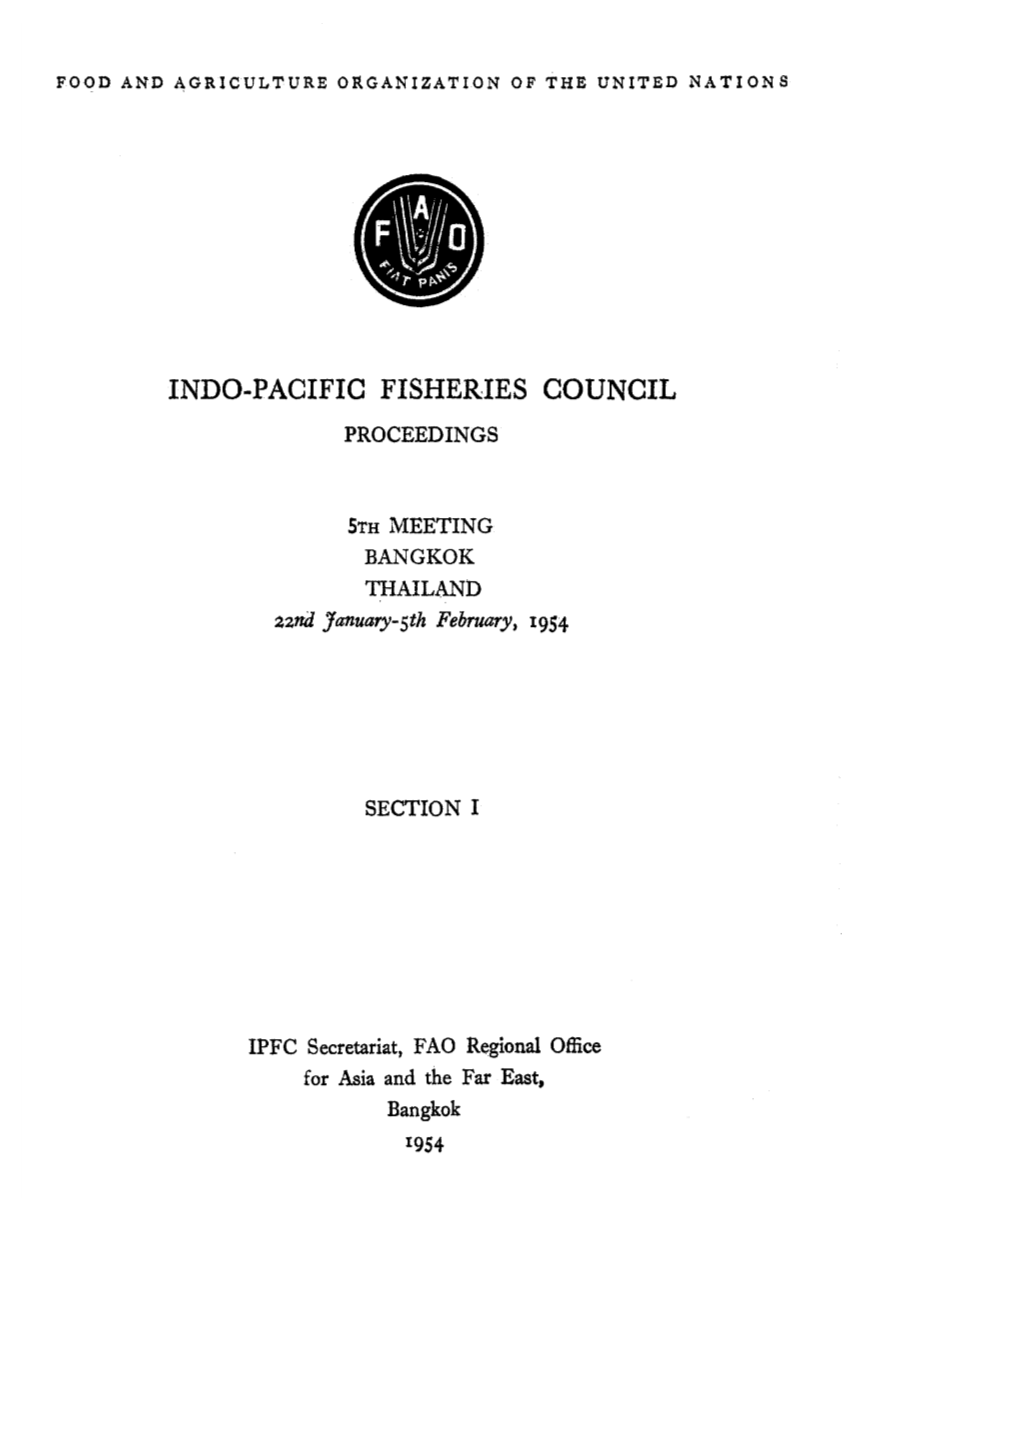 Indo-Pacific Fisheries Council Proceedings